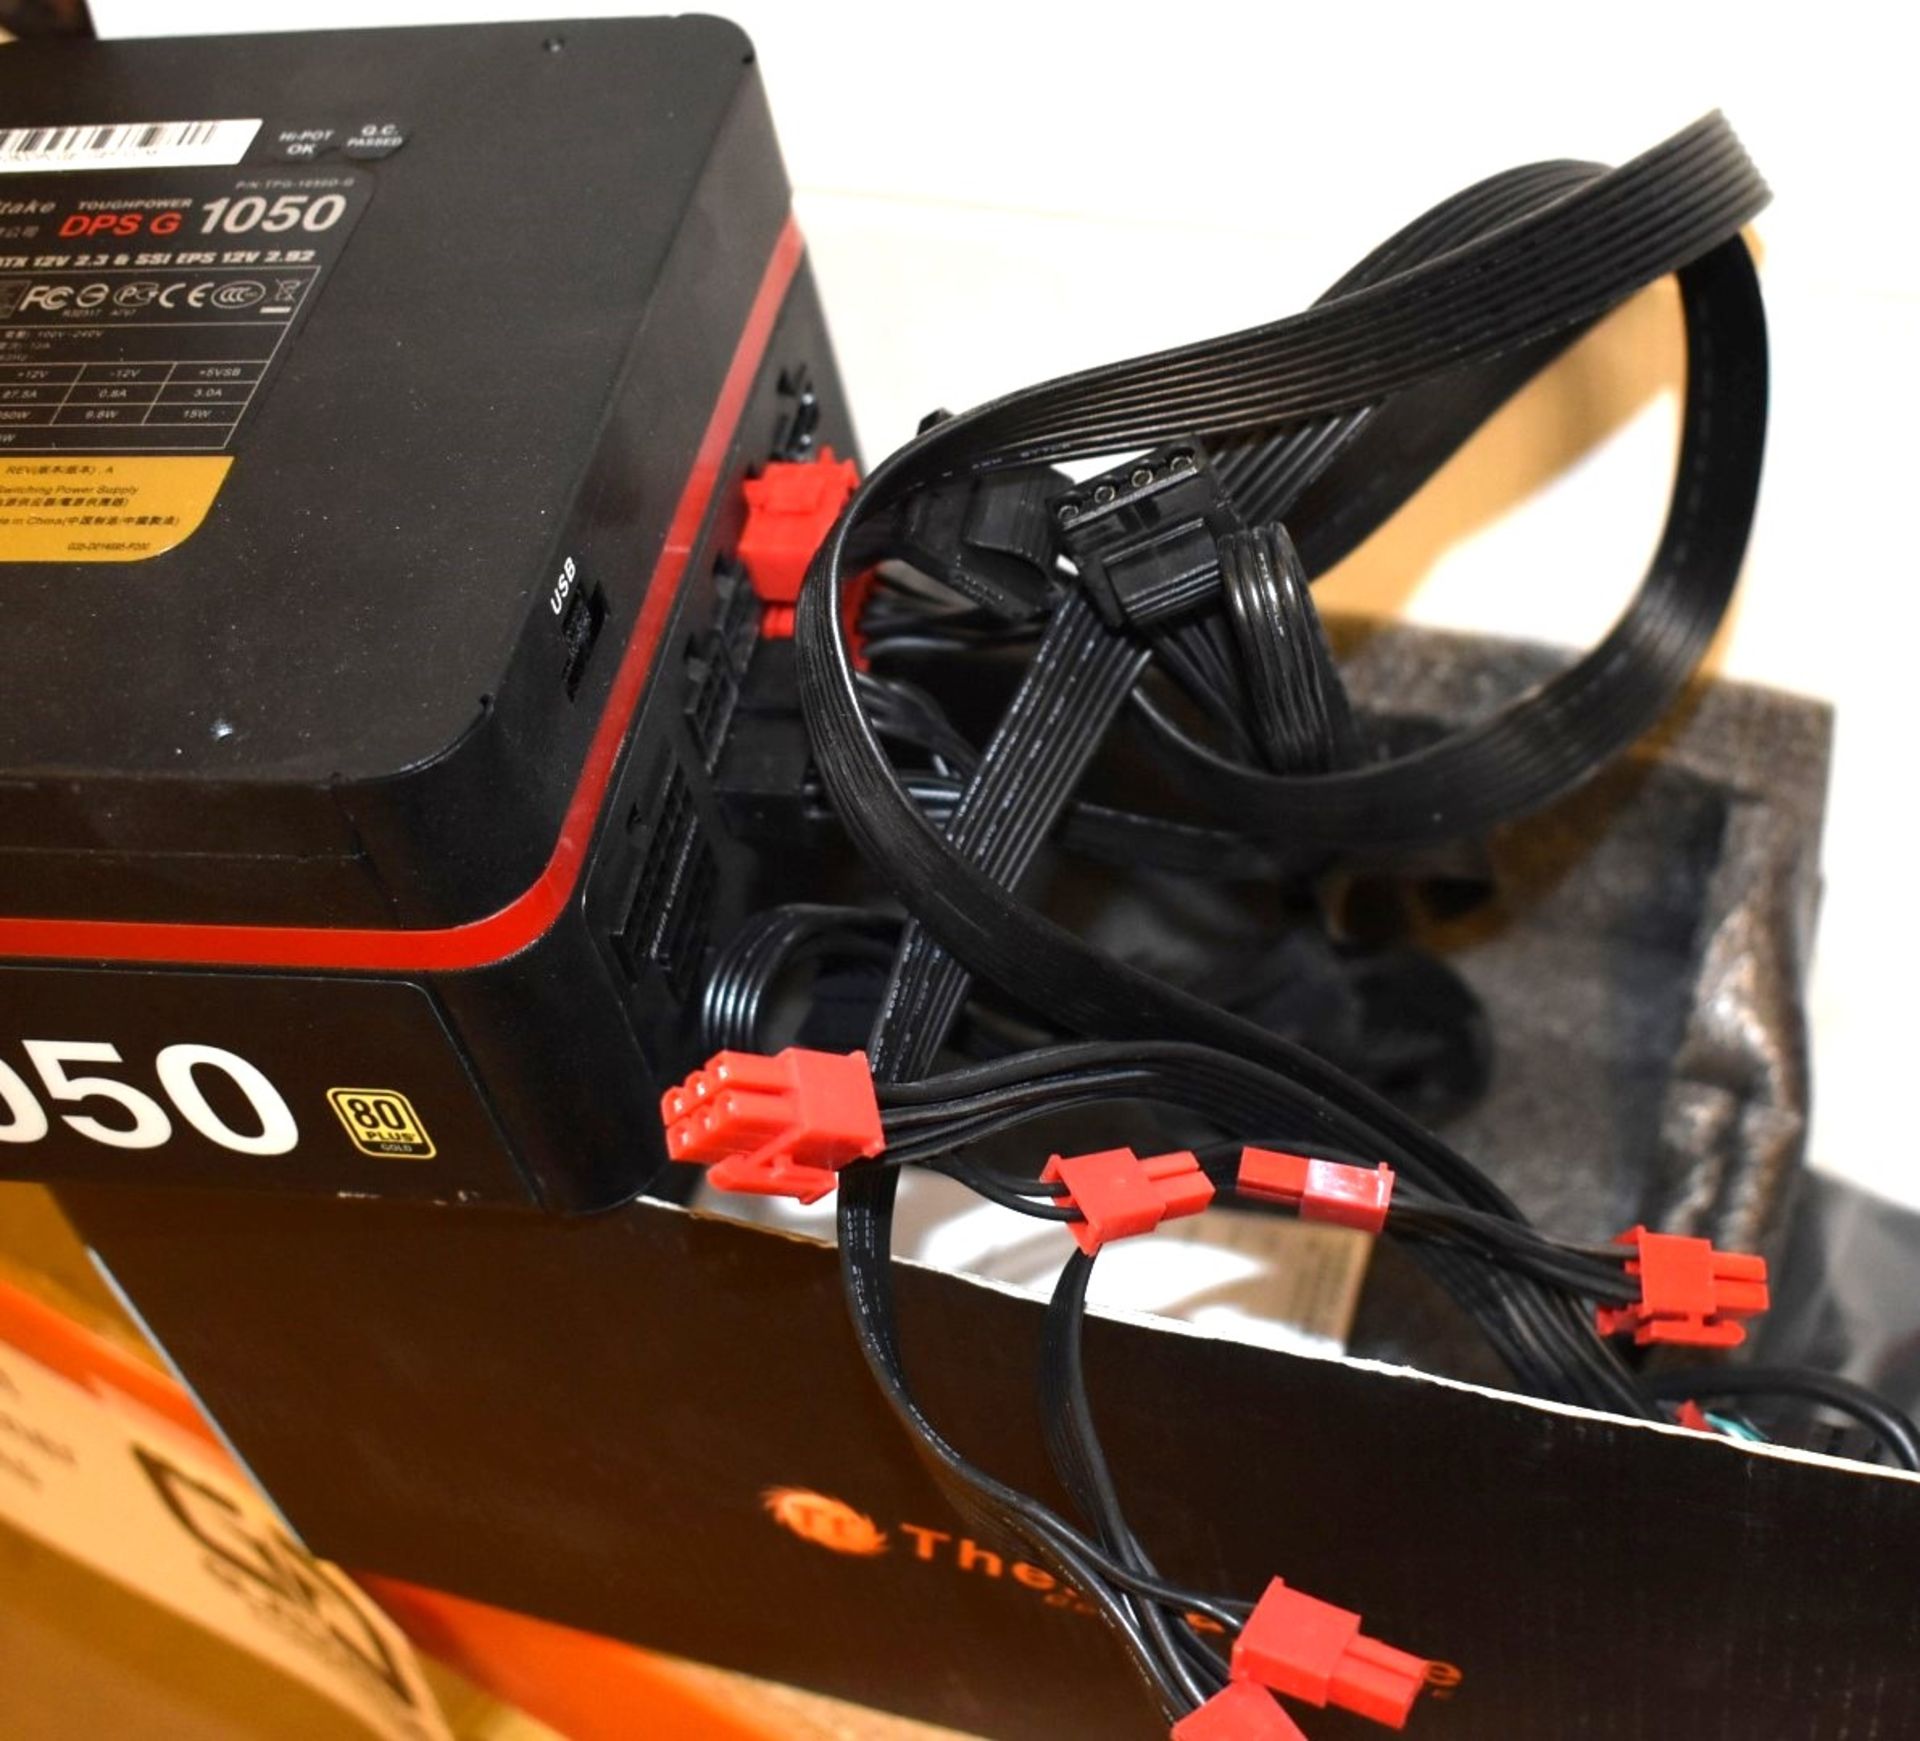 1 x Thermaltake Toughpower DPSG 1050w 80 Plus Gold Modular Power Supply - Boxed With Cables - Image 4 of 4